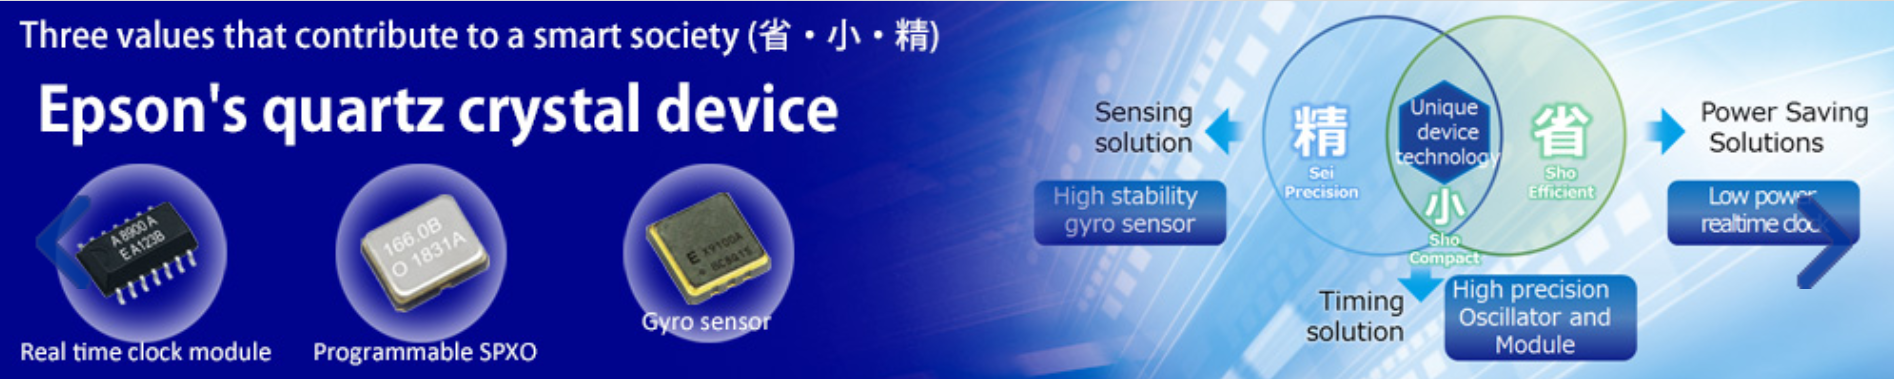 Epson banner (Company Profile Page) Eng.png